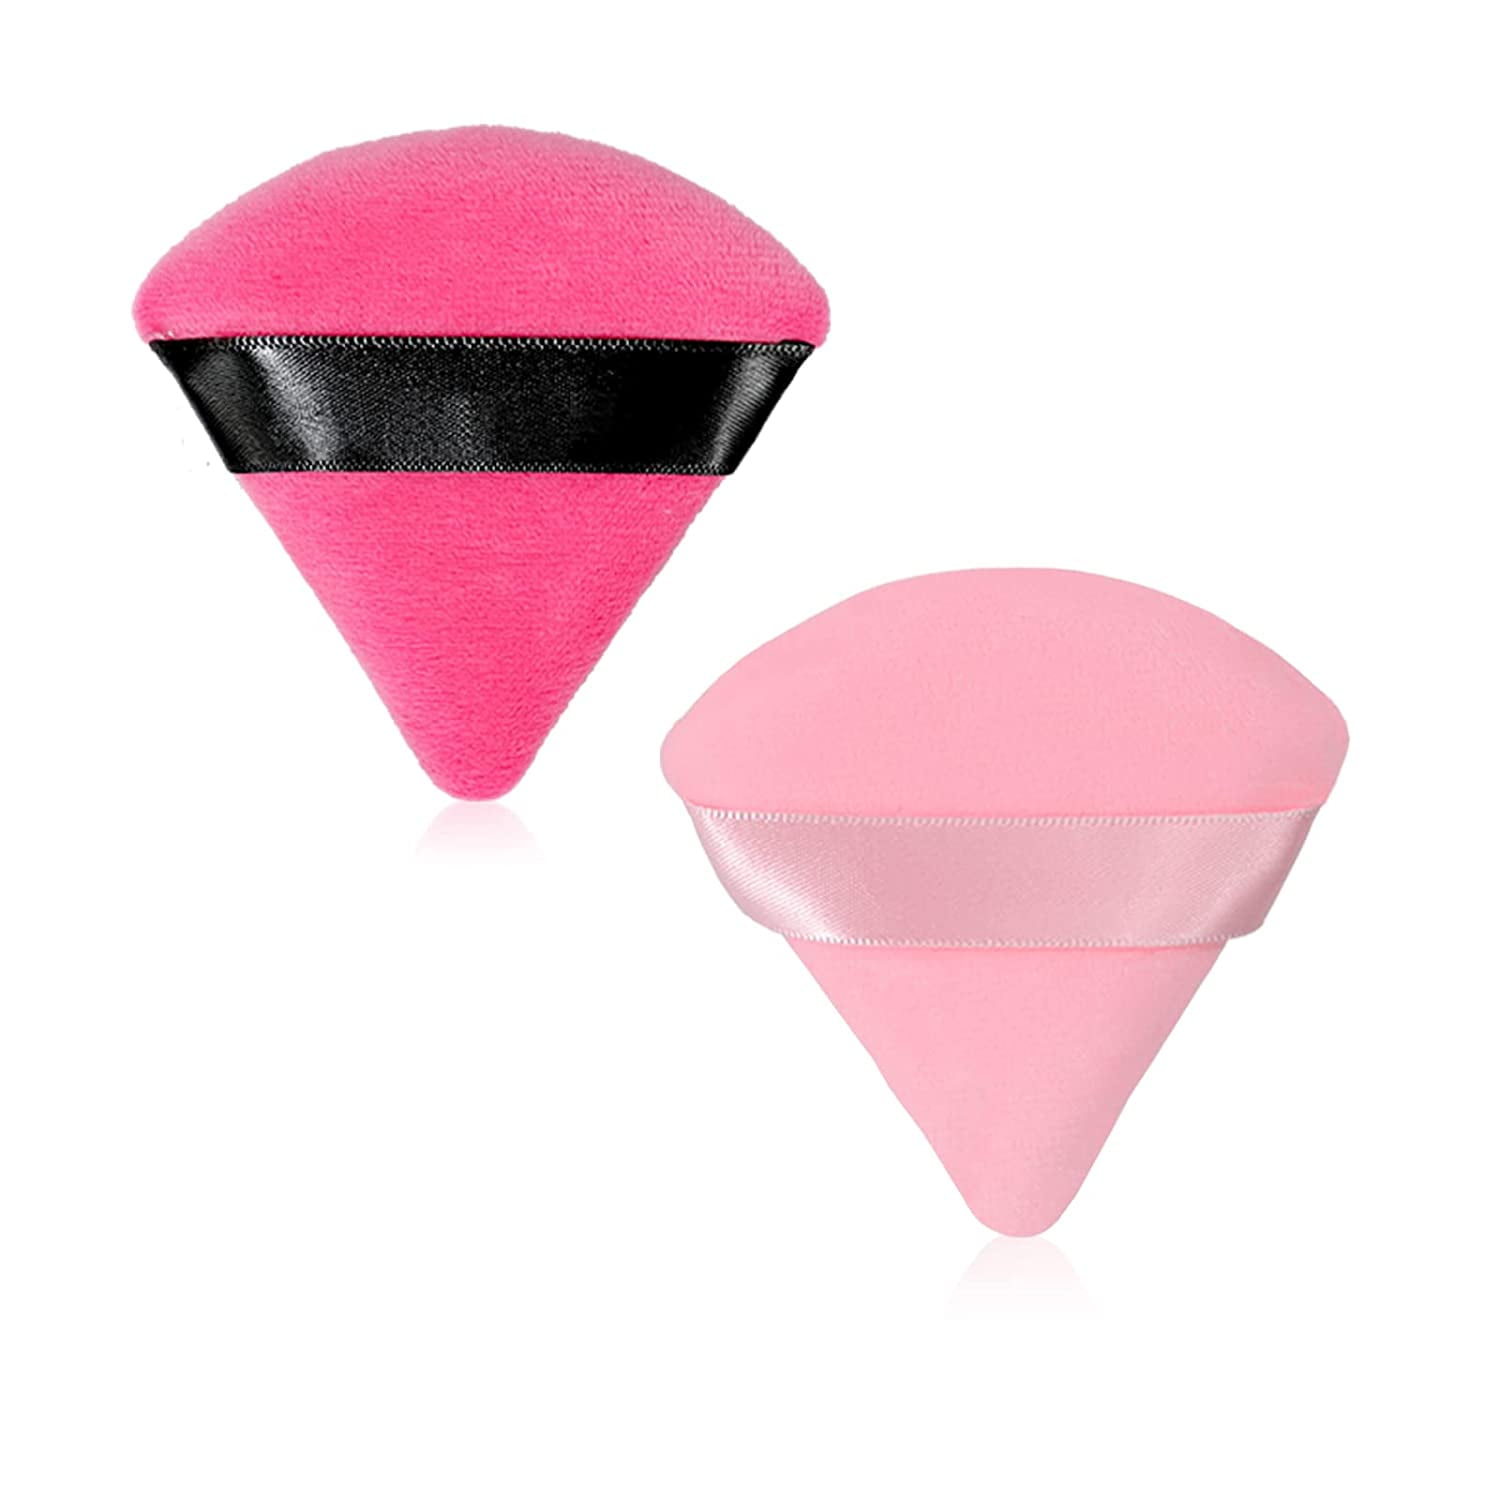 2 Pcs Triangle Velvet Puff Makeup Multifunctional Borlas De Maquillaje for  Under Eye Powder Puff for Wet and Dry Use.Black & Pink